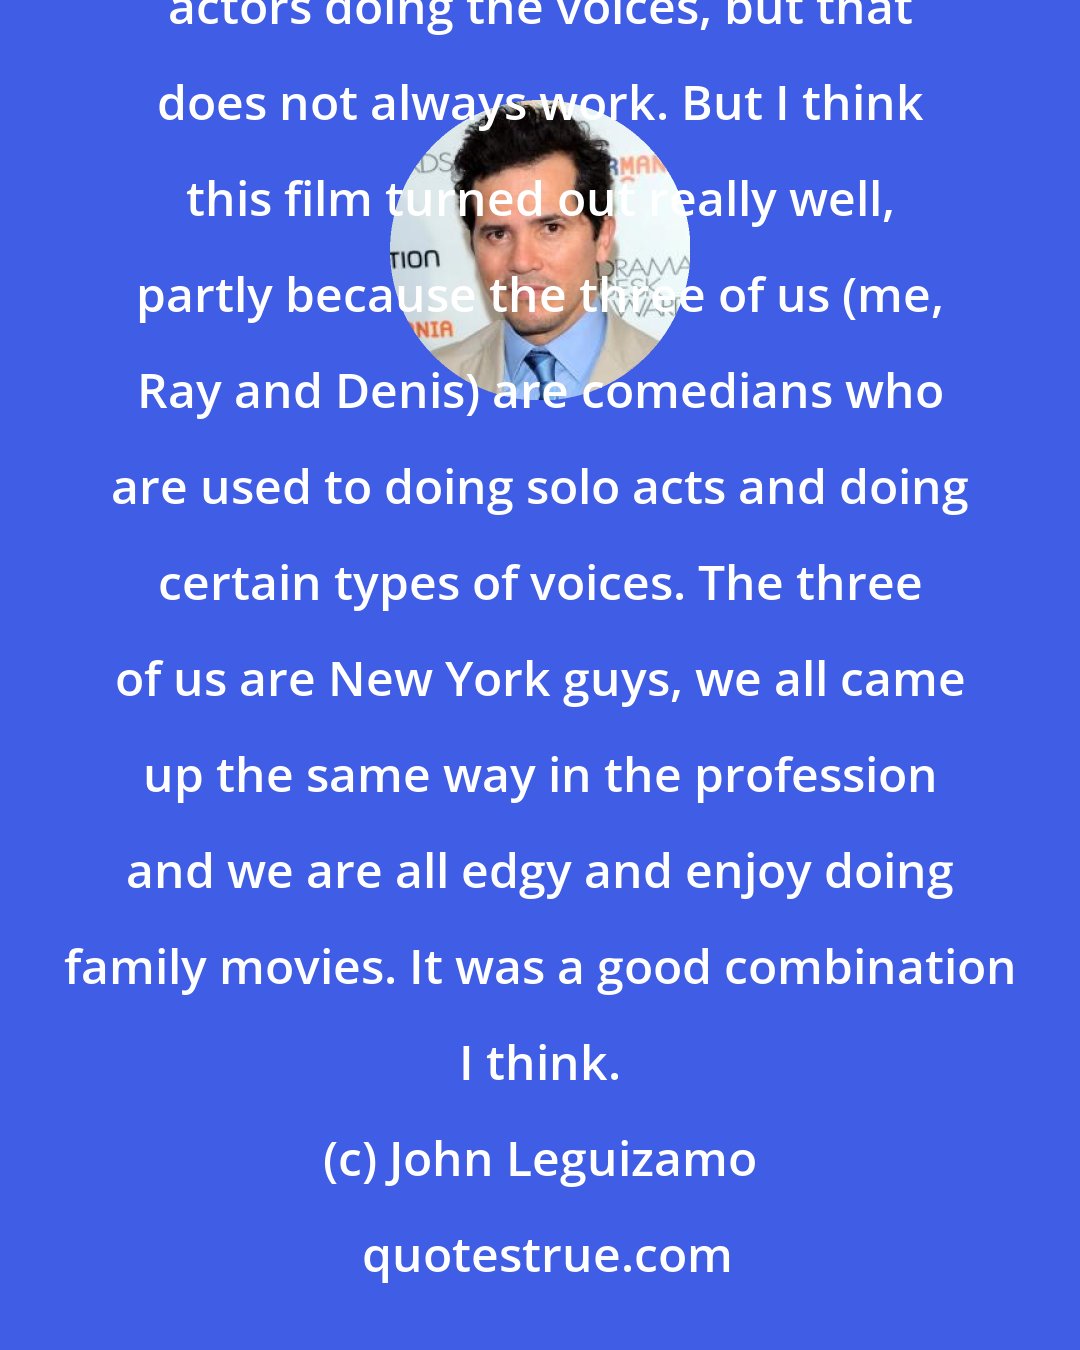 John Leguizamo: It used to be trained professionals doing animation and they were great. Now they have celebrities and famous actors doing the voices, but that does not always work. But I think this film turned out really well, partly because the three of us (me, Ray and Denis) are comedians who are used to doing solo acts and doing certain types of voices. The three of us are New York guys, we all came up the same way in the profession and we are all edgy and enjoy doing family movies. It was a good combination I think.